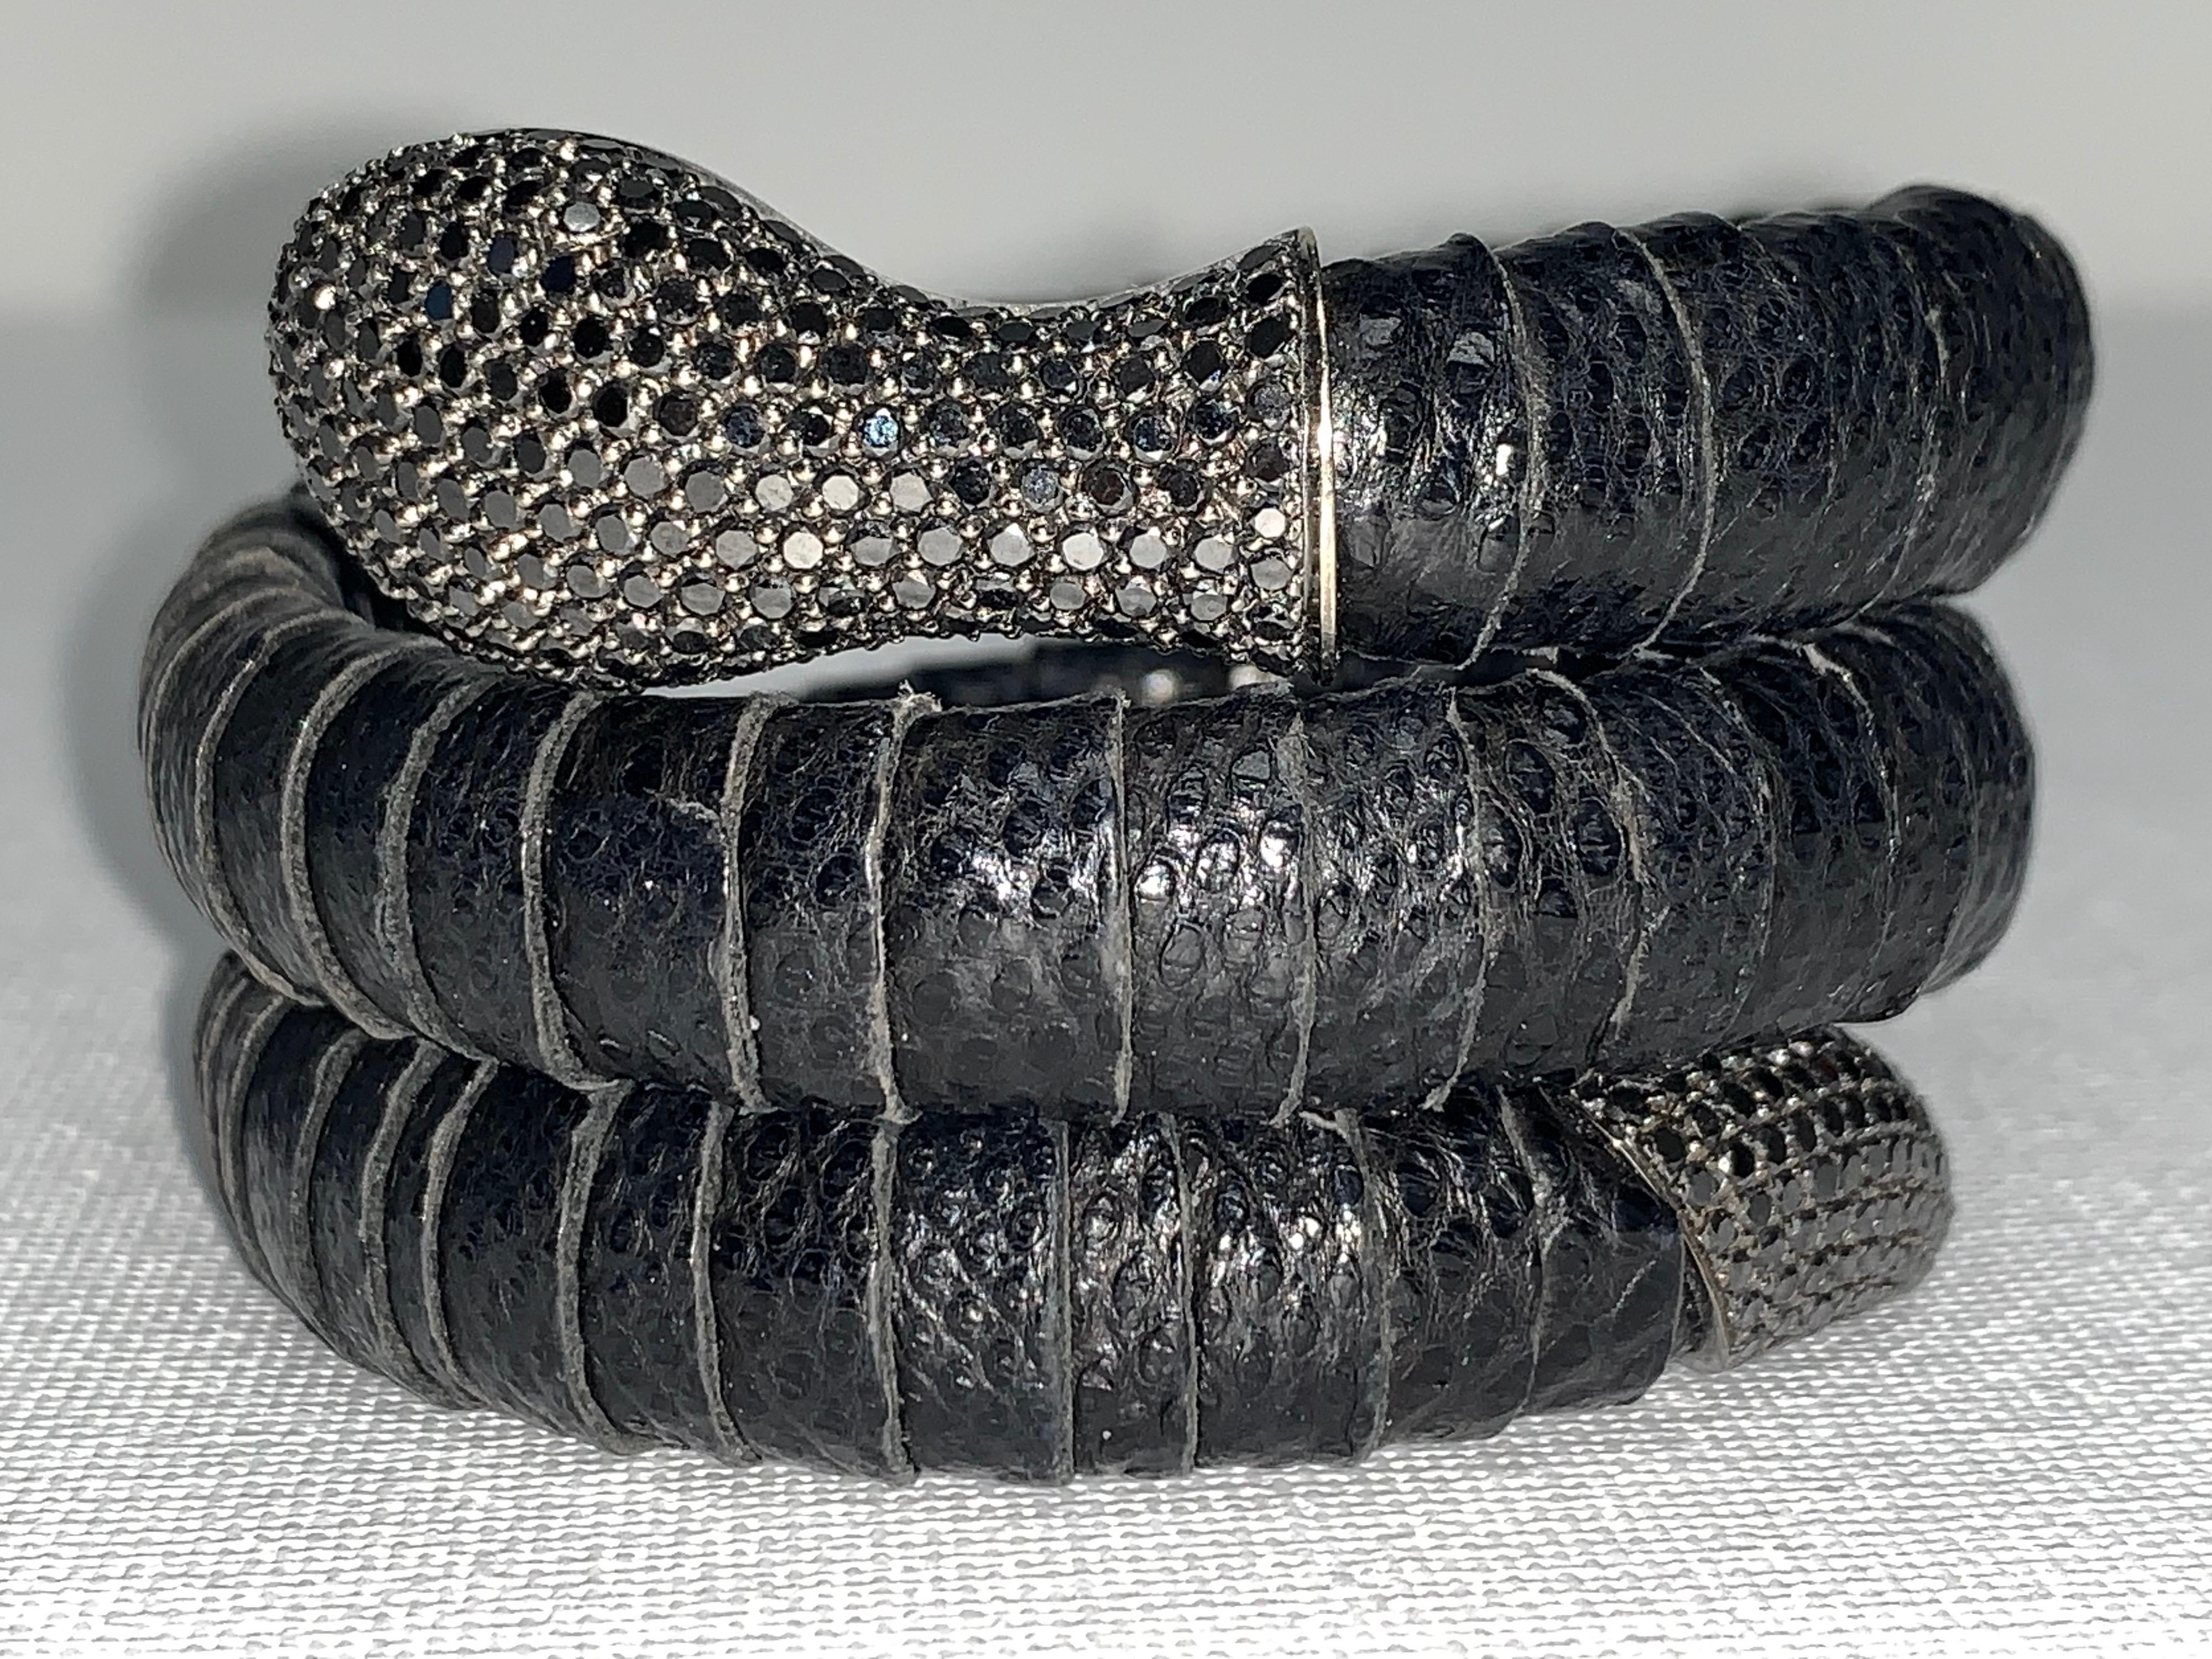 Black Pavé Diamond, Leather Snake Bracelet. 

Featuring a Black Pavé Diamond Snake Bracelet with a total weight of 5.50 carats, set in 18K White Gold. 

The body of the snake is made of fine genuine black leather.  The head and tail are accented